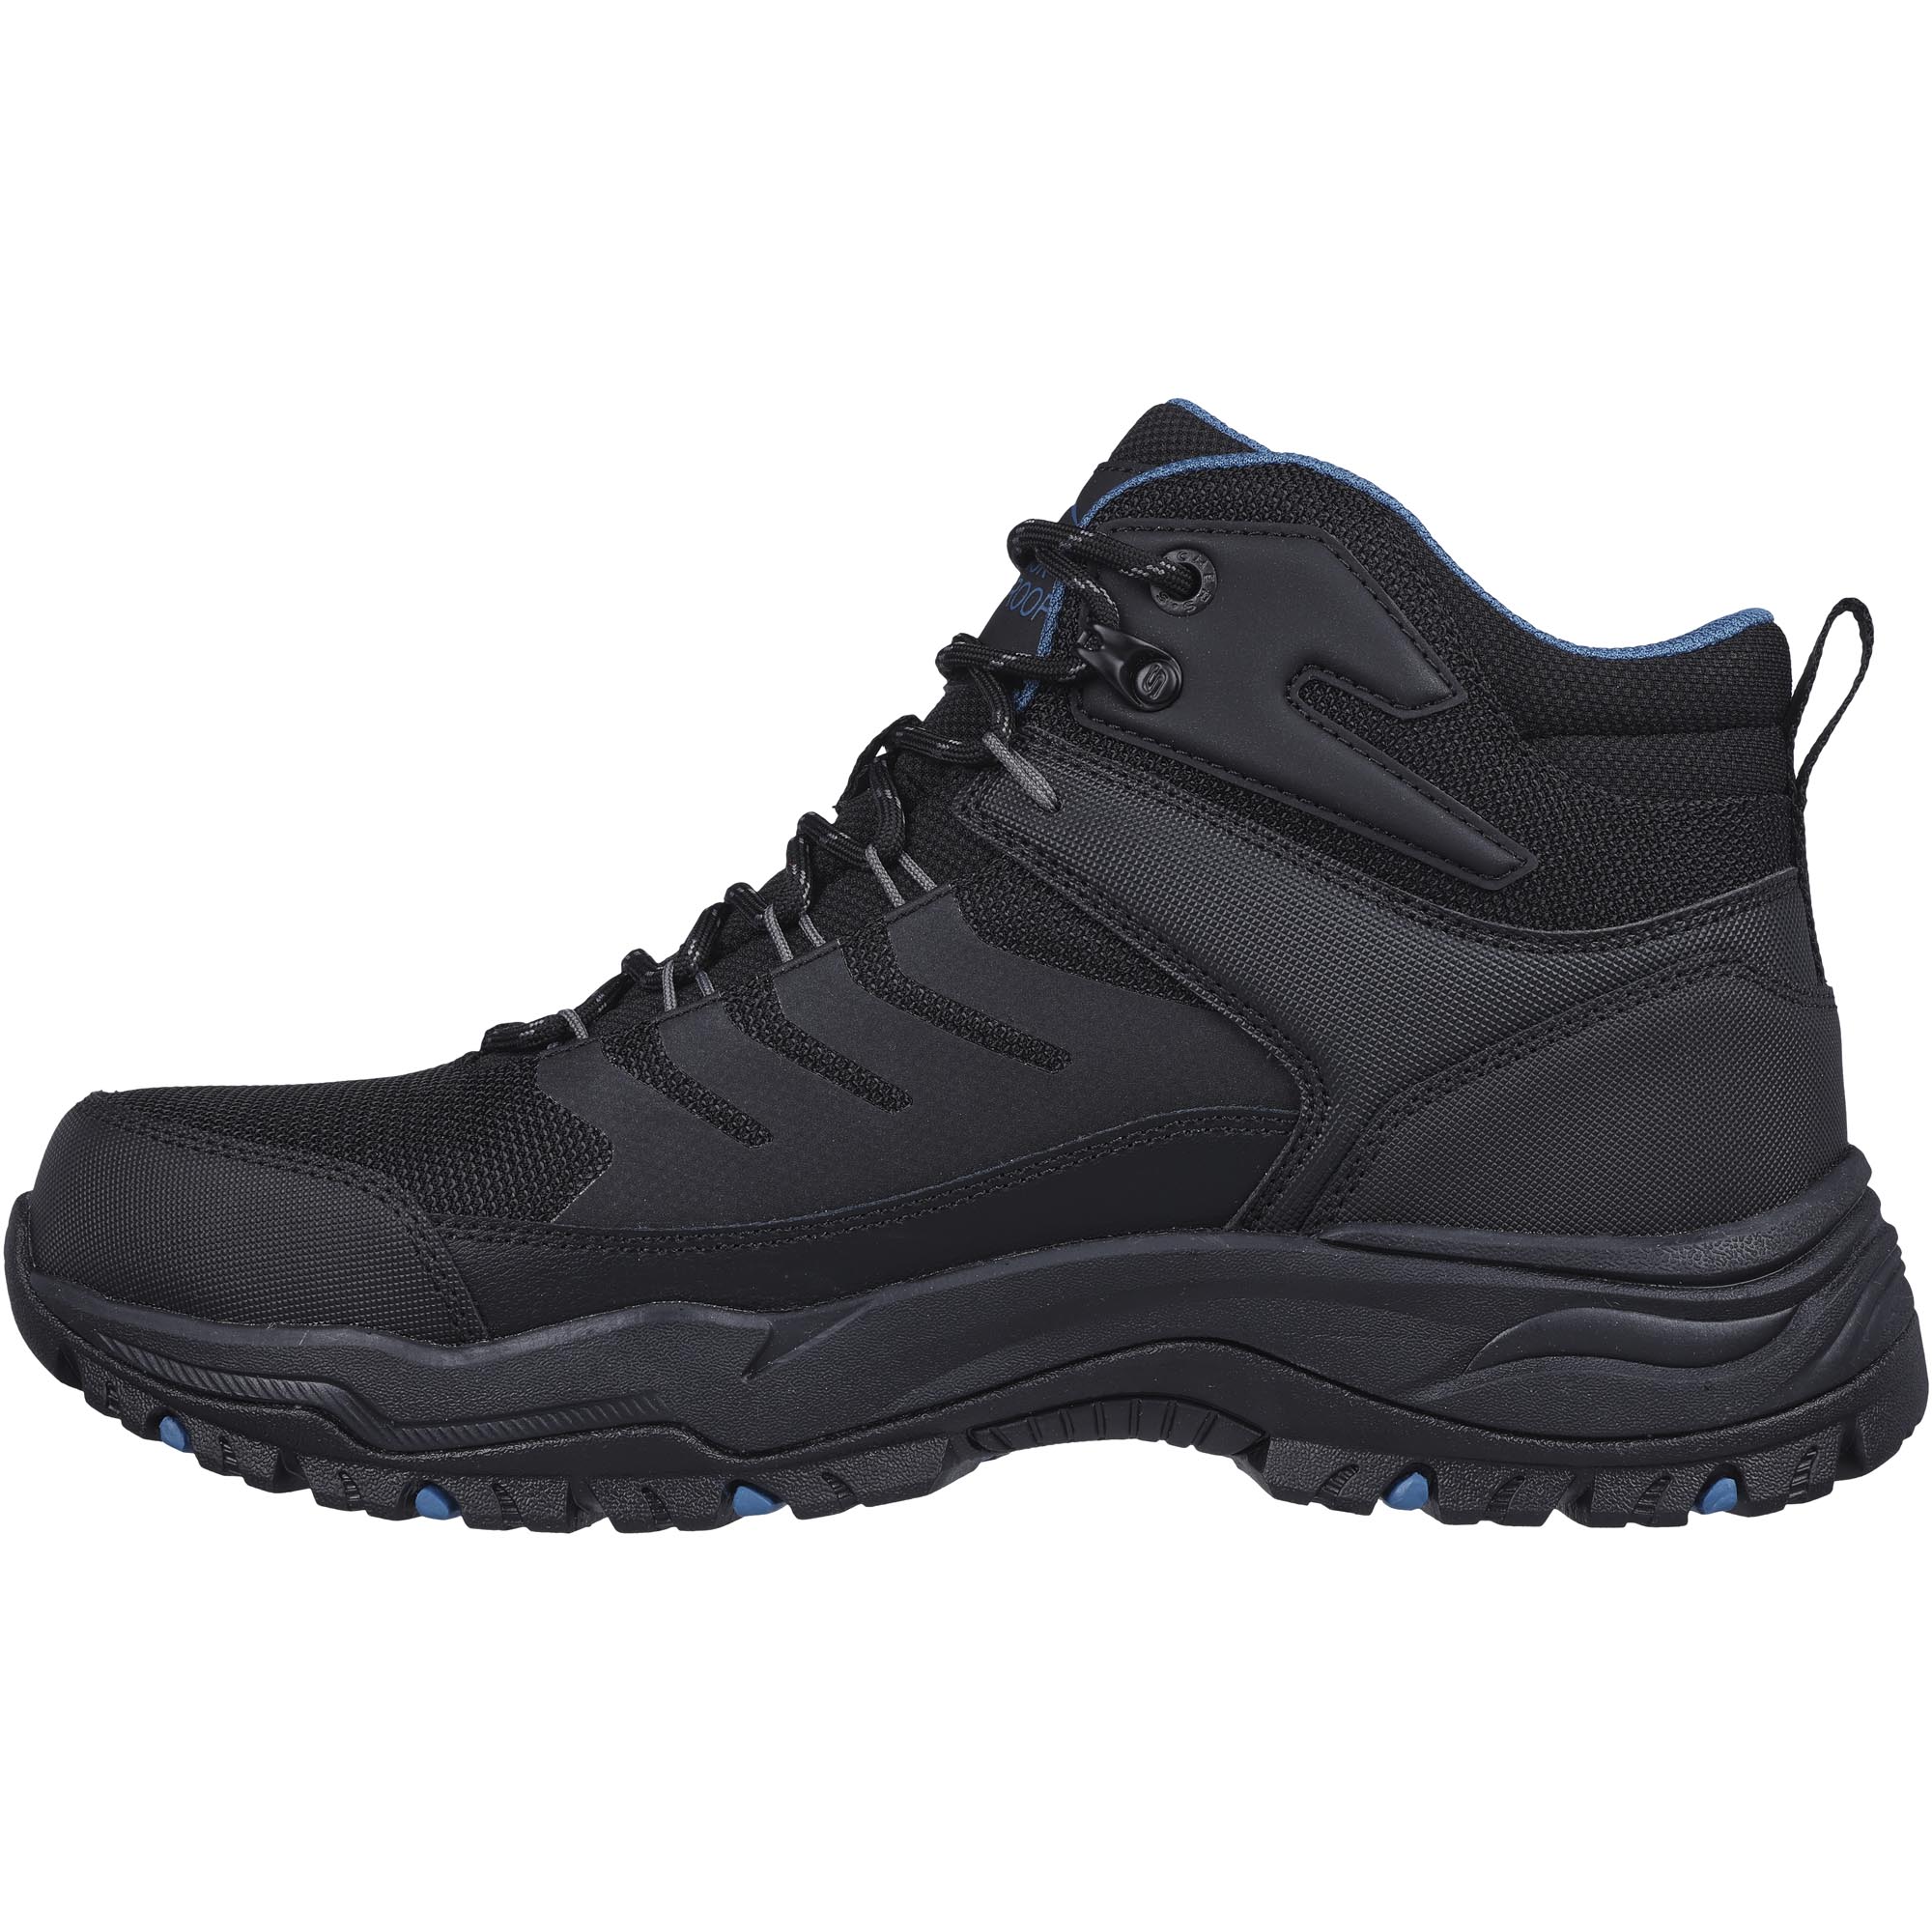 Skechers Relaxed Arch Fit Dawson Raveno Hiking Boots